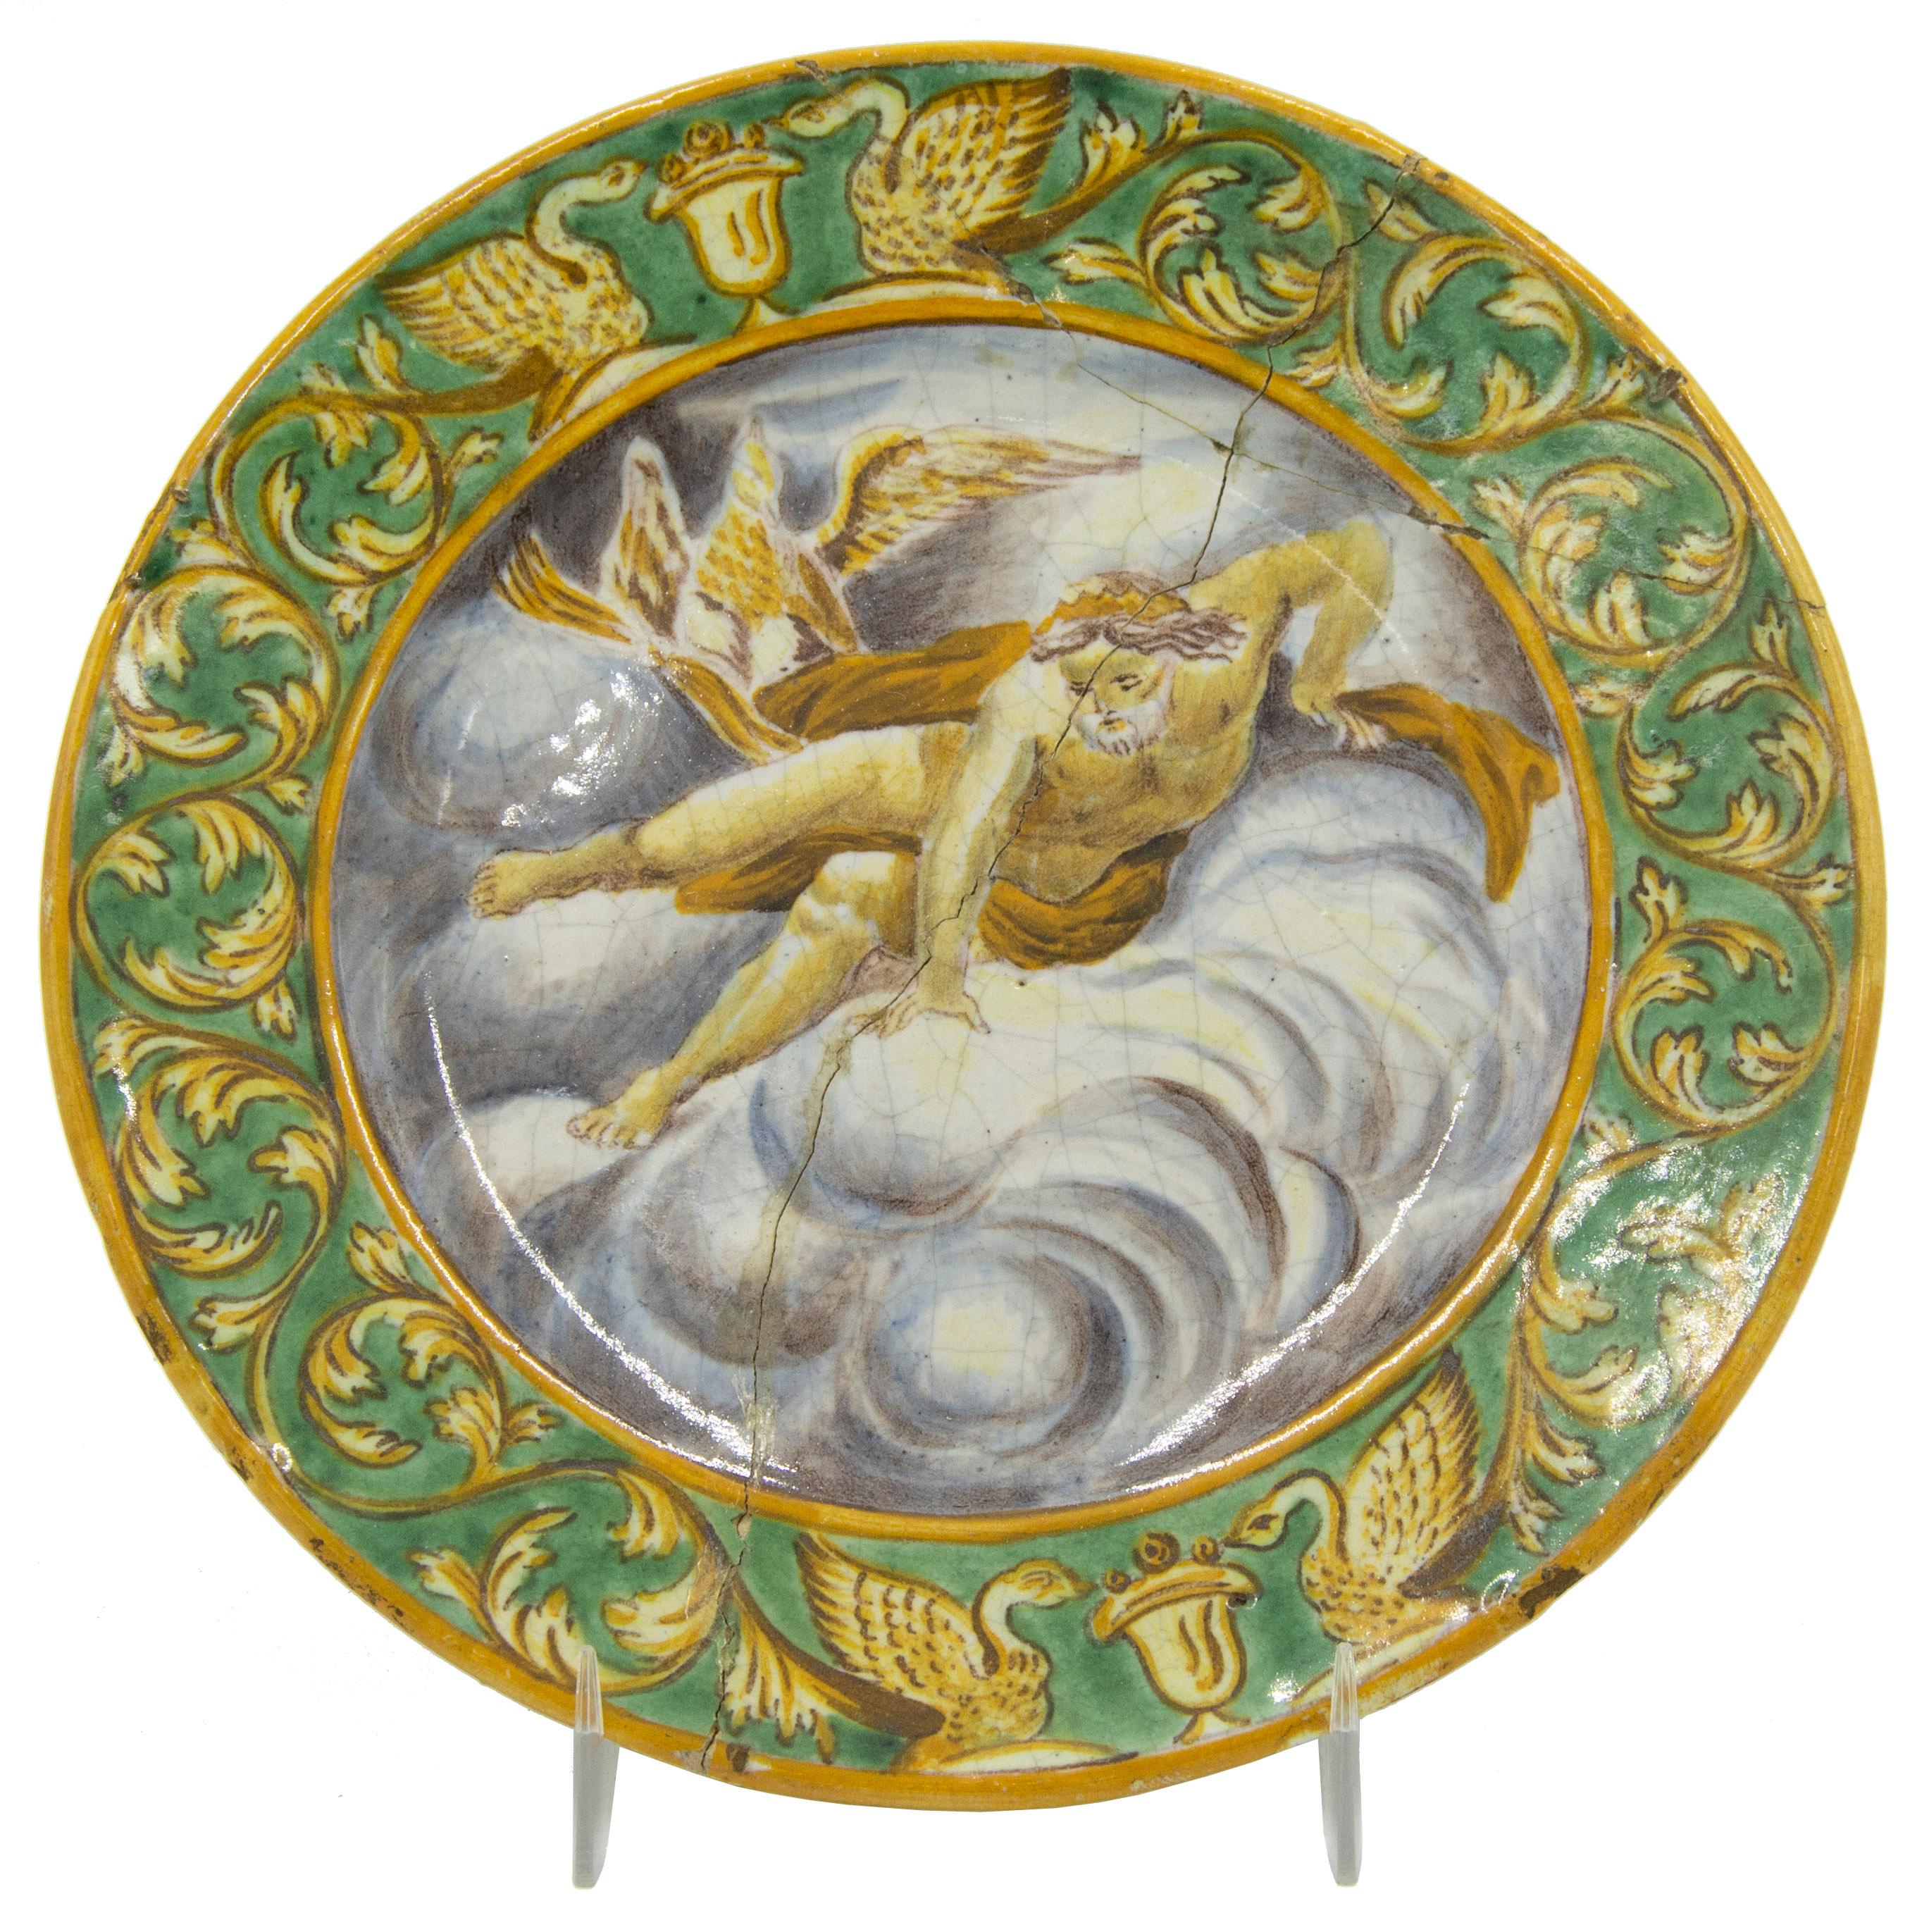 Set of 6 Italian Renaissance-style (17/18th Century) green and gold Majolica porcelain plates with classical scenes (Sara D. Roosevelt) (PRICED AS SET)
